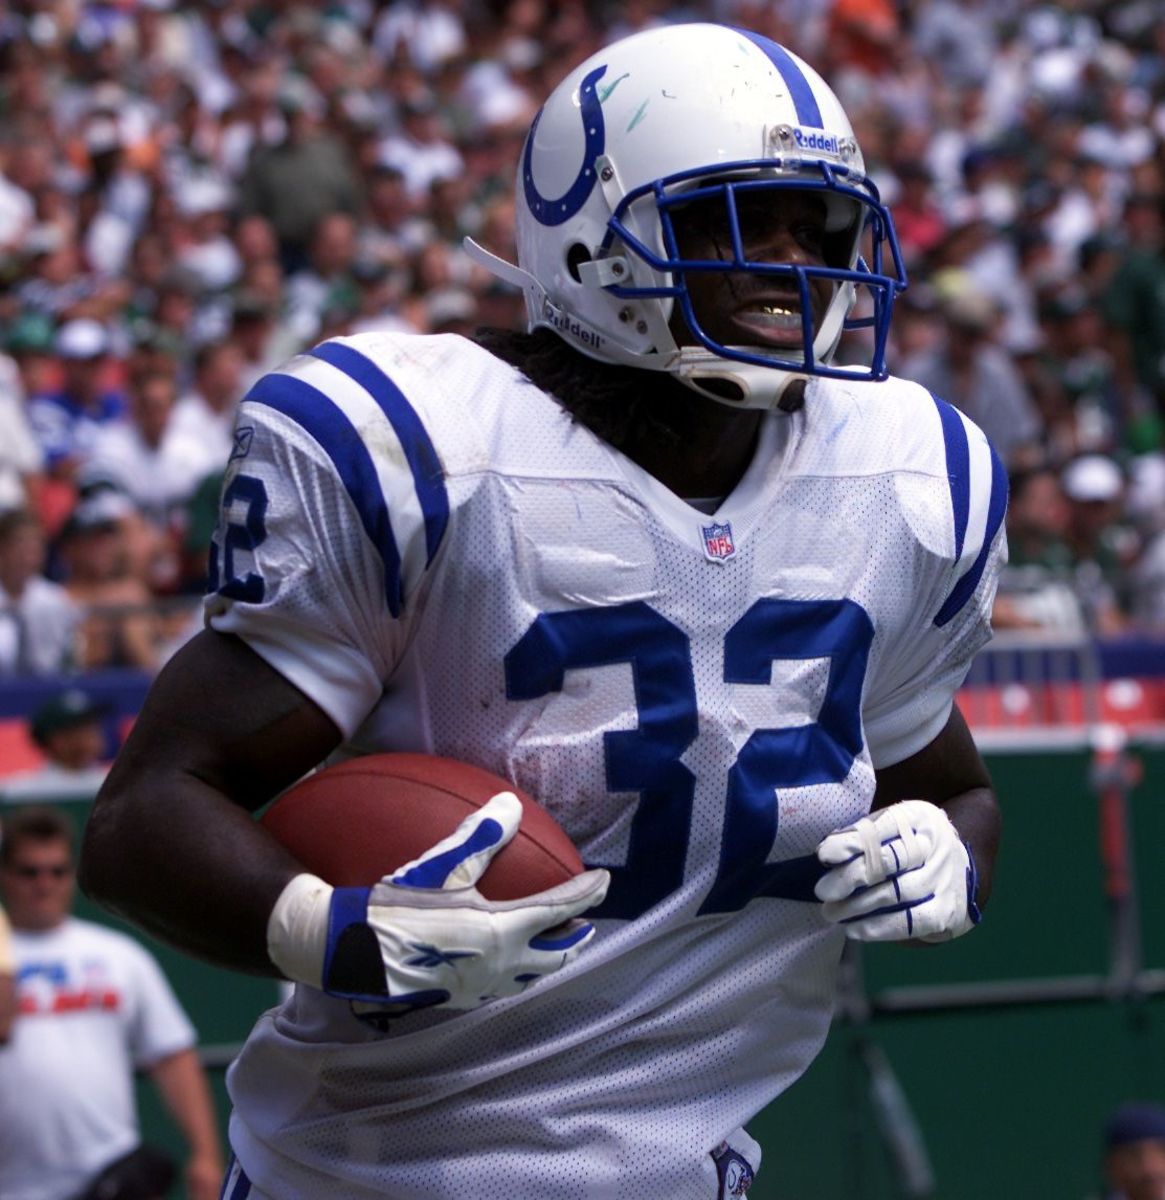 Indianapolis Colts' RB Edgerrin James Enshrined into Pro Football